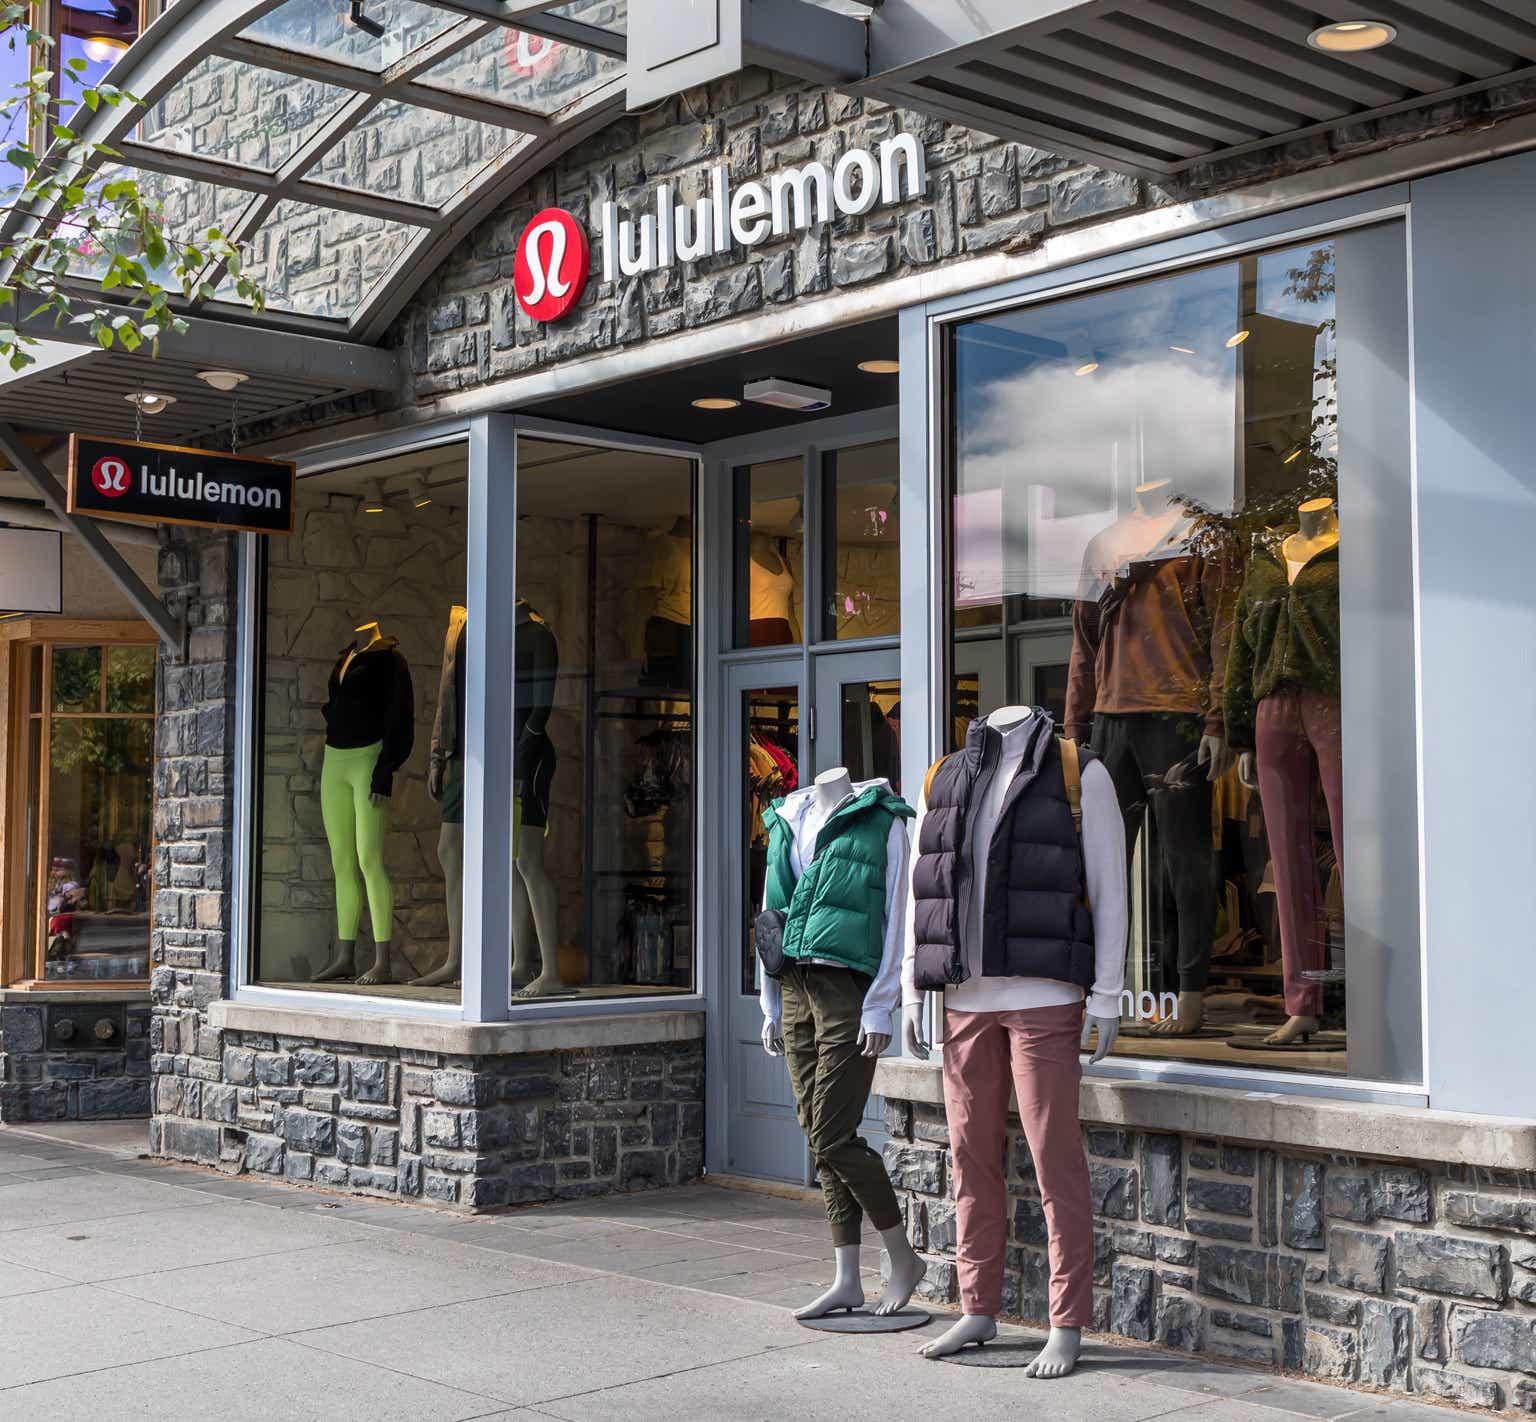 is lululemon really much cheaper in canada?